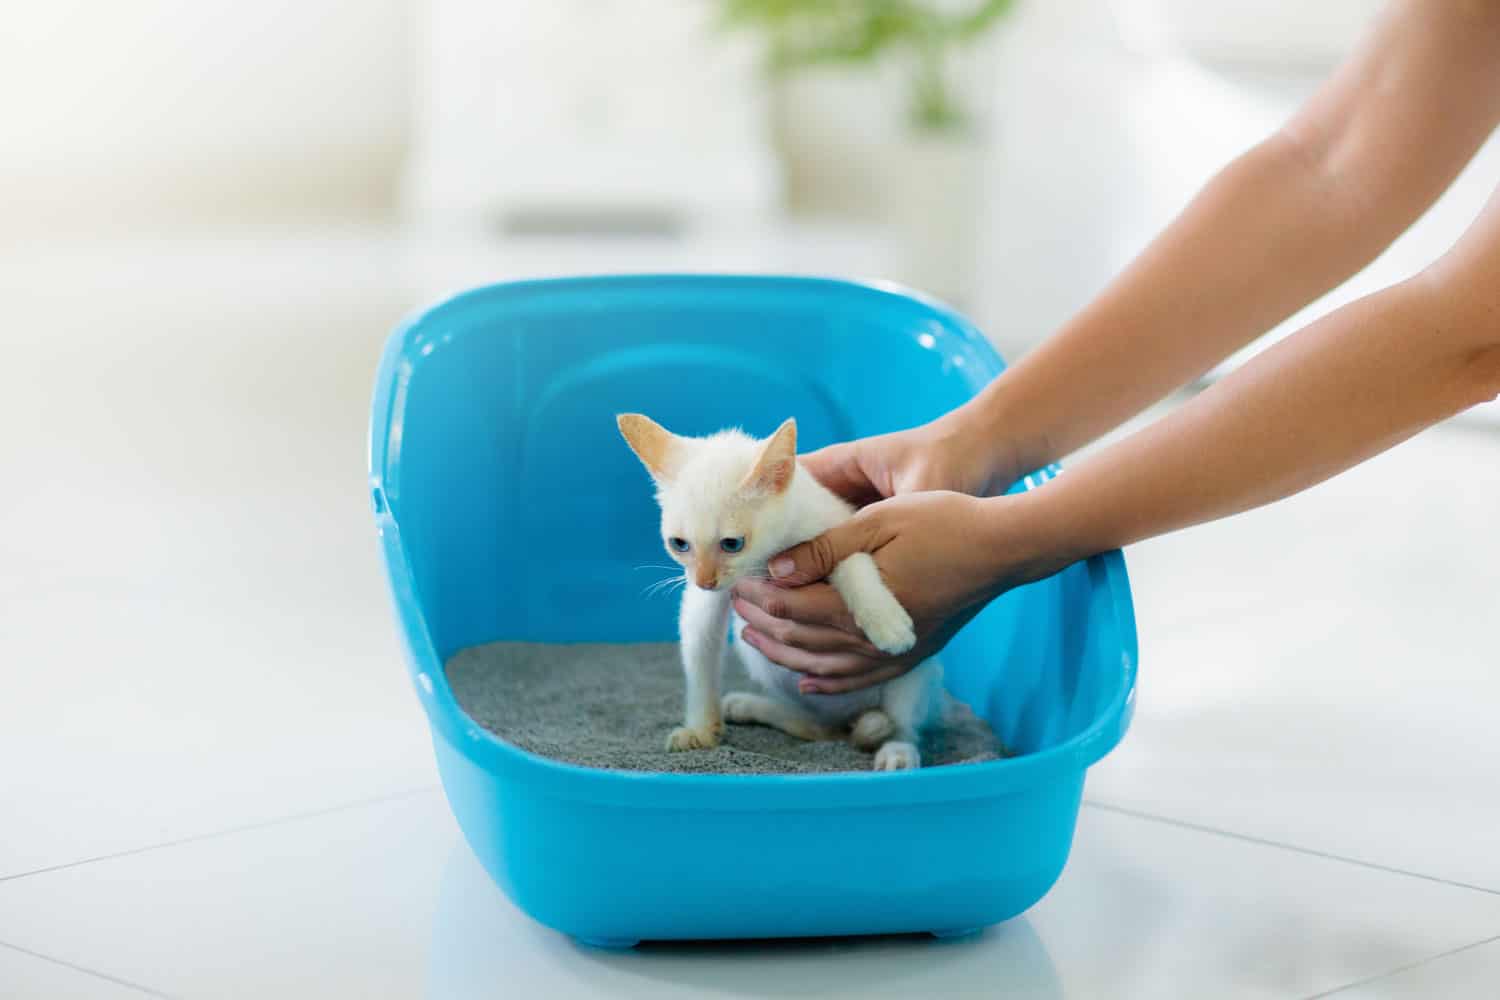 Cat in litter box. White little kitten in toilet with sand filler. Home pet care and hygiene. Potty training for young animal. Litterbox for cats.
